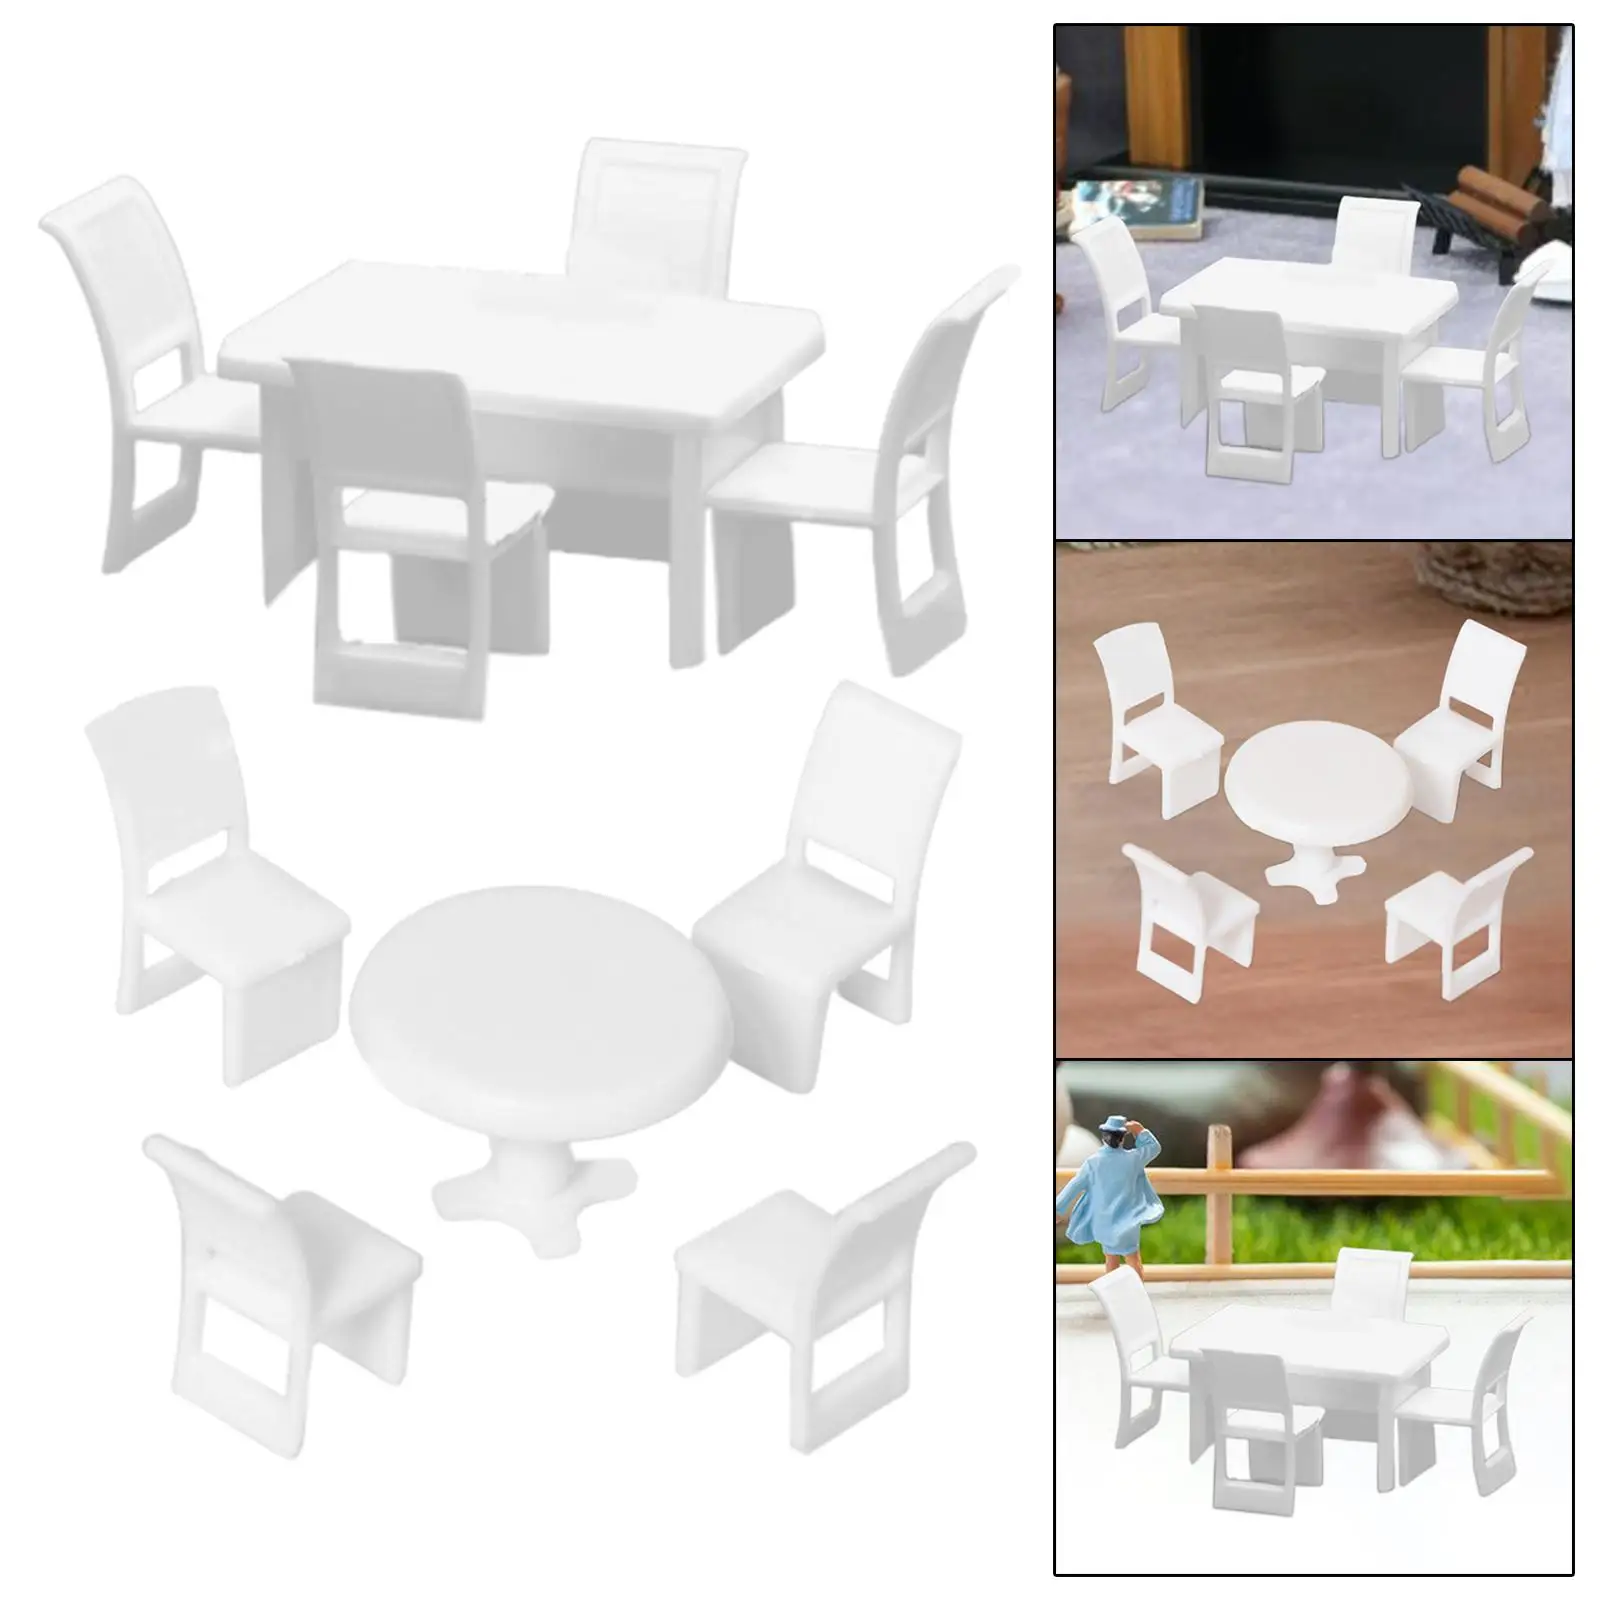 1/50 Chair Table Model Set Hobby Toys Simulated Scene Layout Diorama Accessory for Diorama Micro Landscape Sand Table Decor